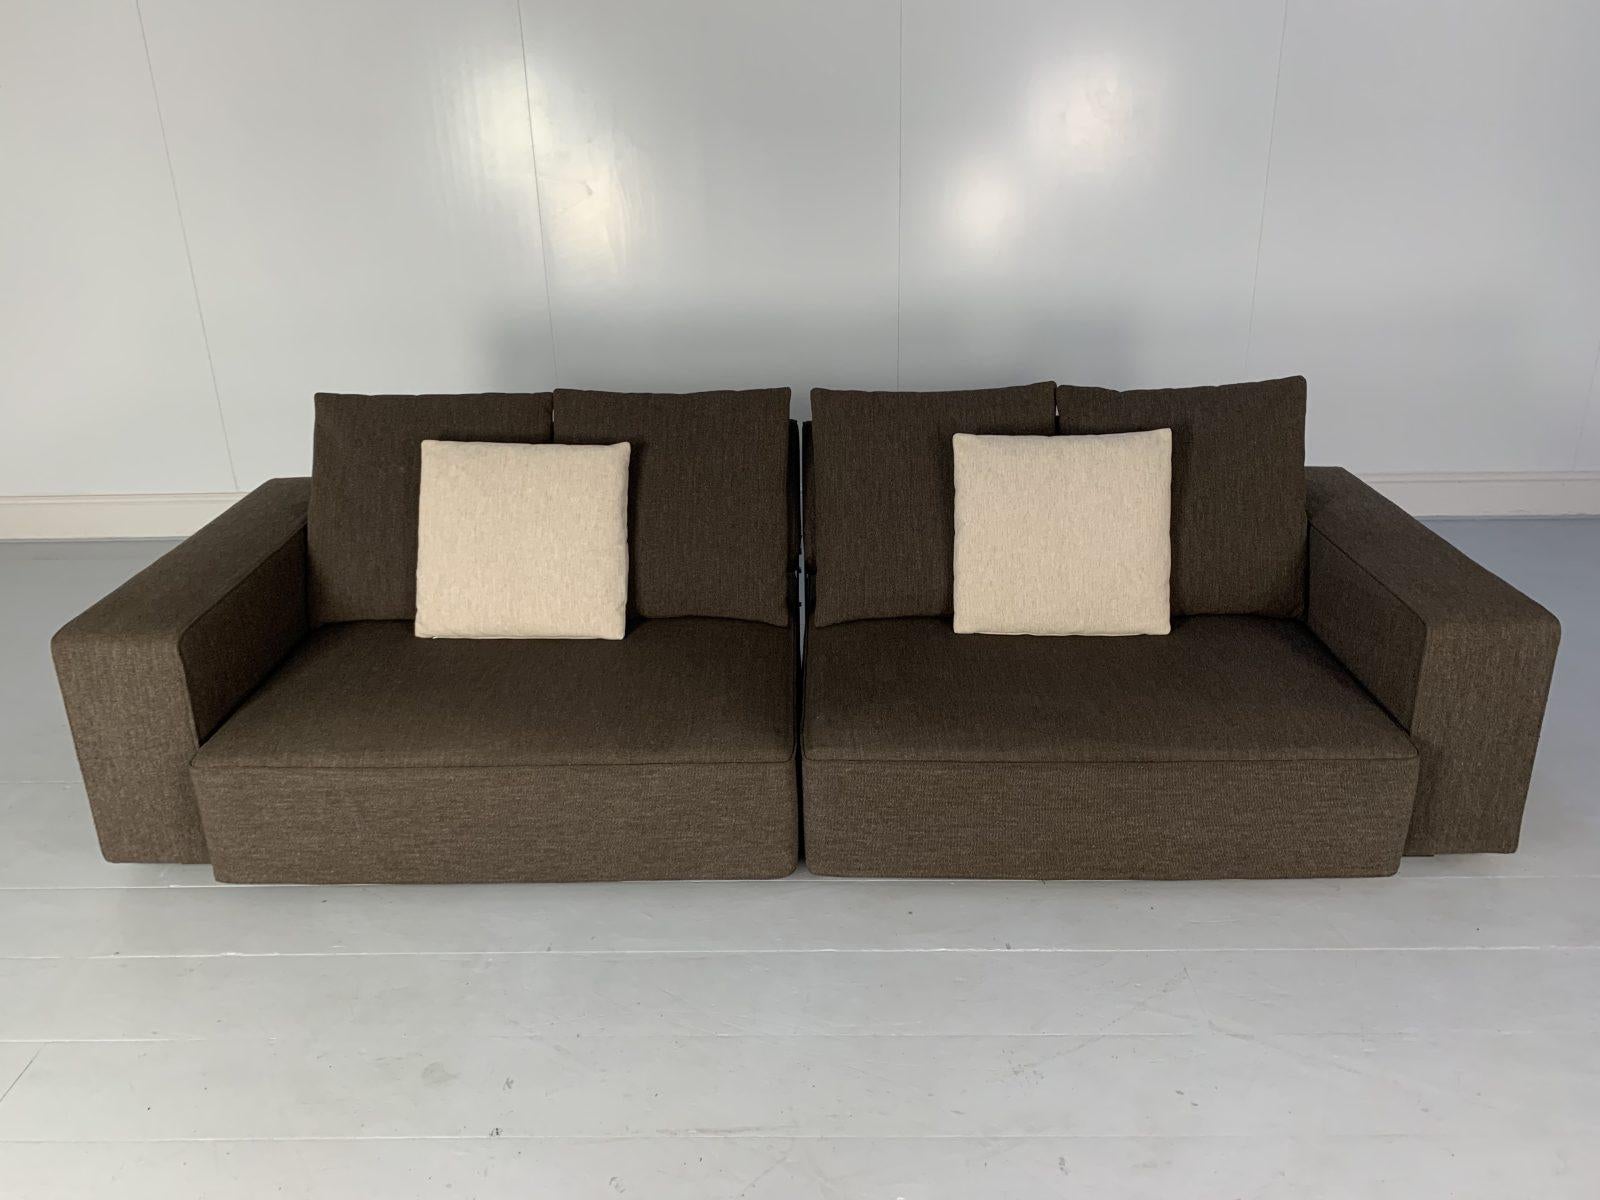 Hello Friends, and welcome to another unmissable offering from Lord Browns Furniture, the UK’s premier resource for fine Sofas and Chairs.

On offer on this occasion is a superb “Andy ’13” AD248 Large 2-Seat Sectional Sofa from the “Maxalto” range